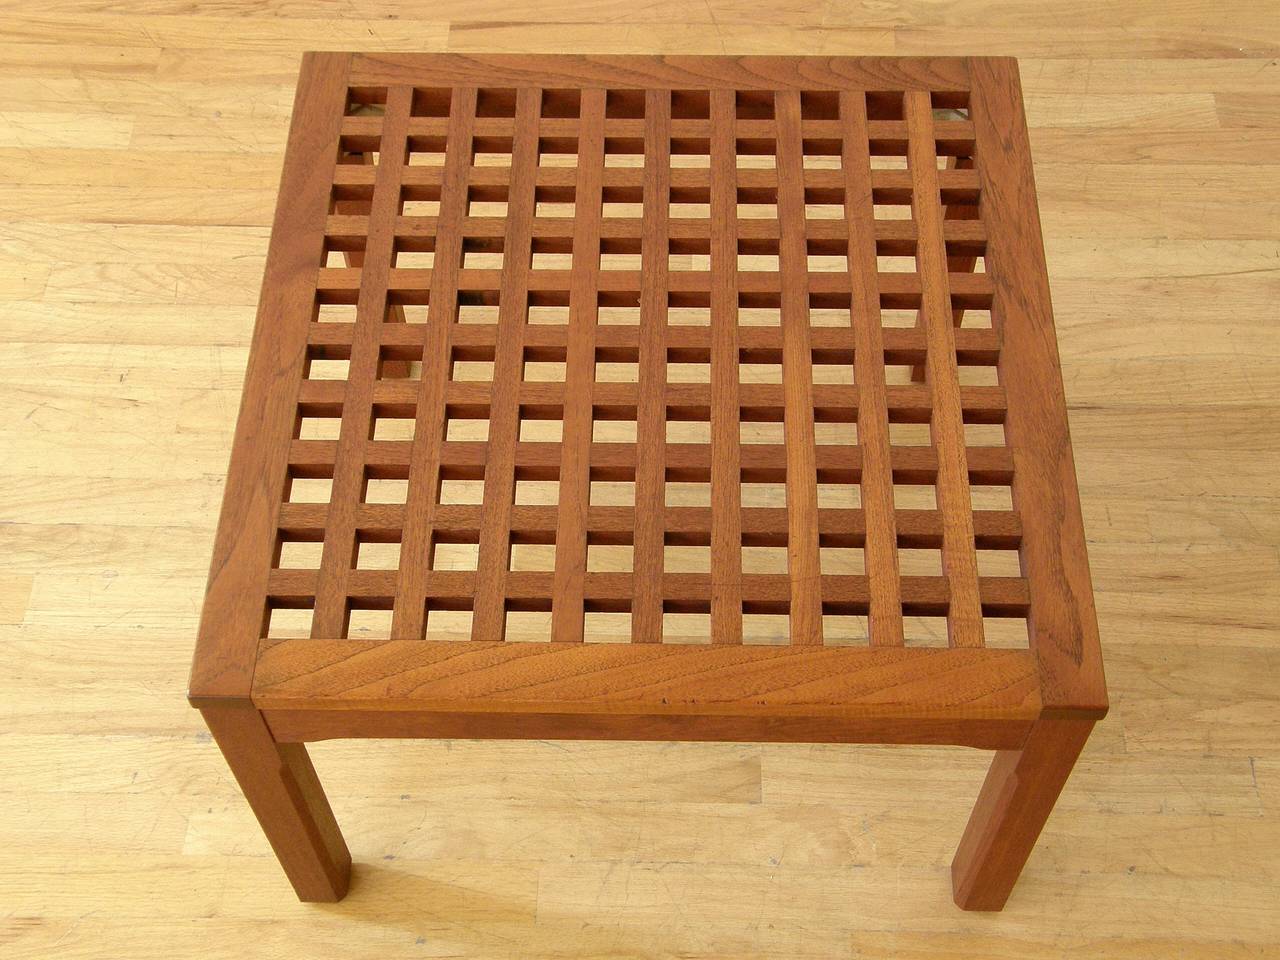 Square teak table with a grid form top. This versatile piece can be used as a coffee table, side table, or corner table. The design is reminiscent of the grid form trays designed by Jen Quistgaard for Dansk.

Please contact us if you have any